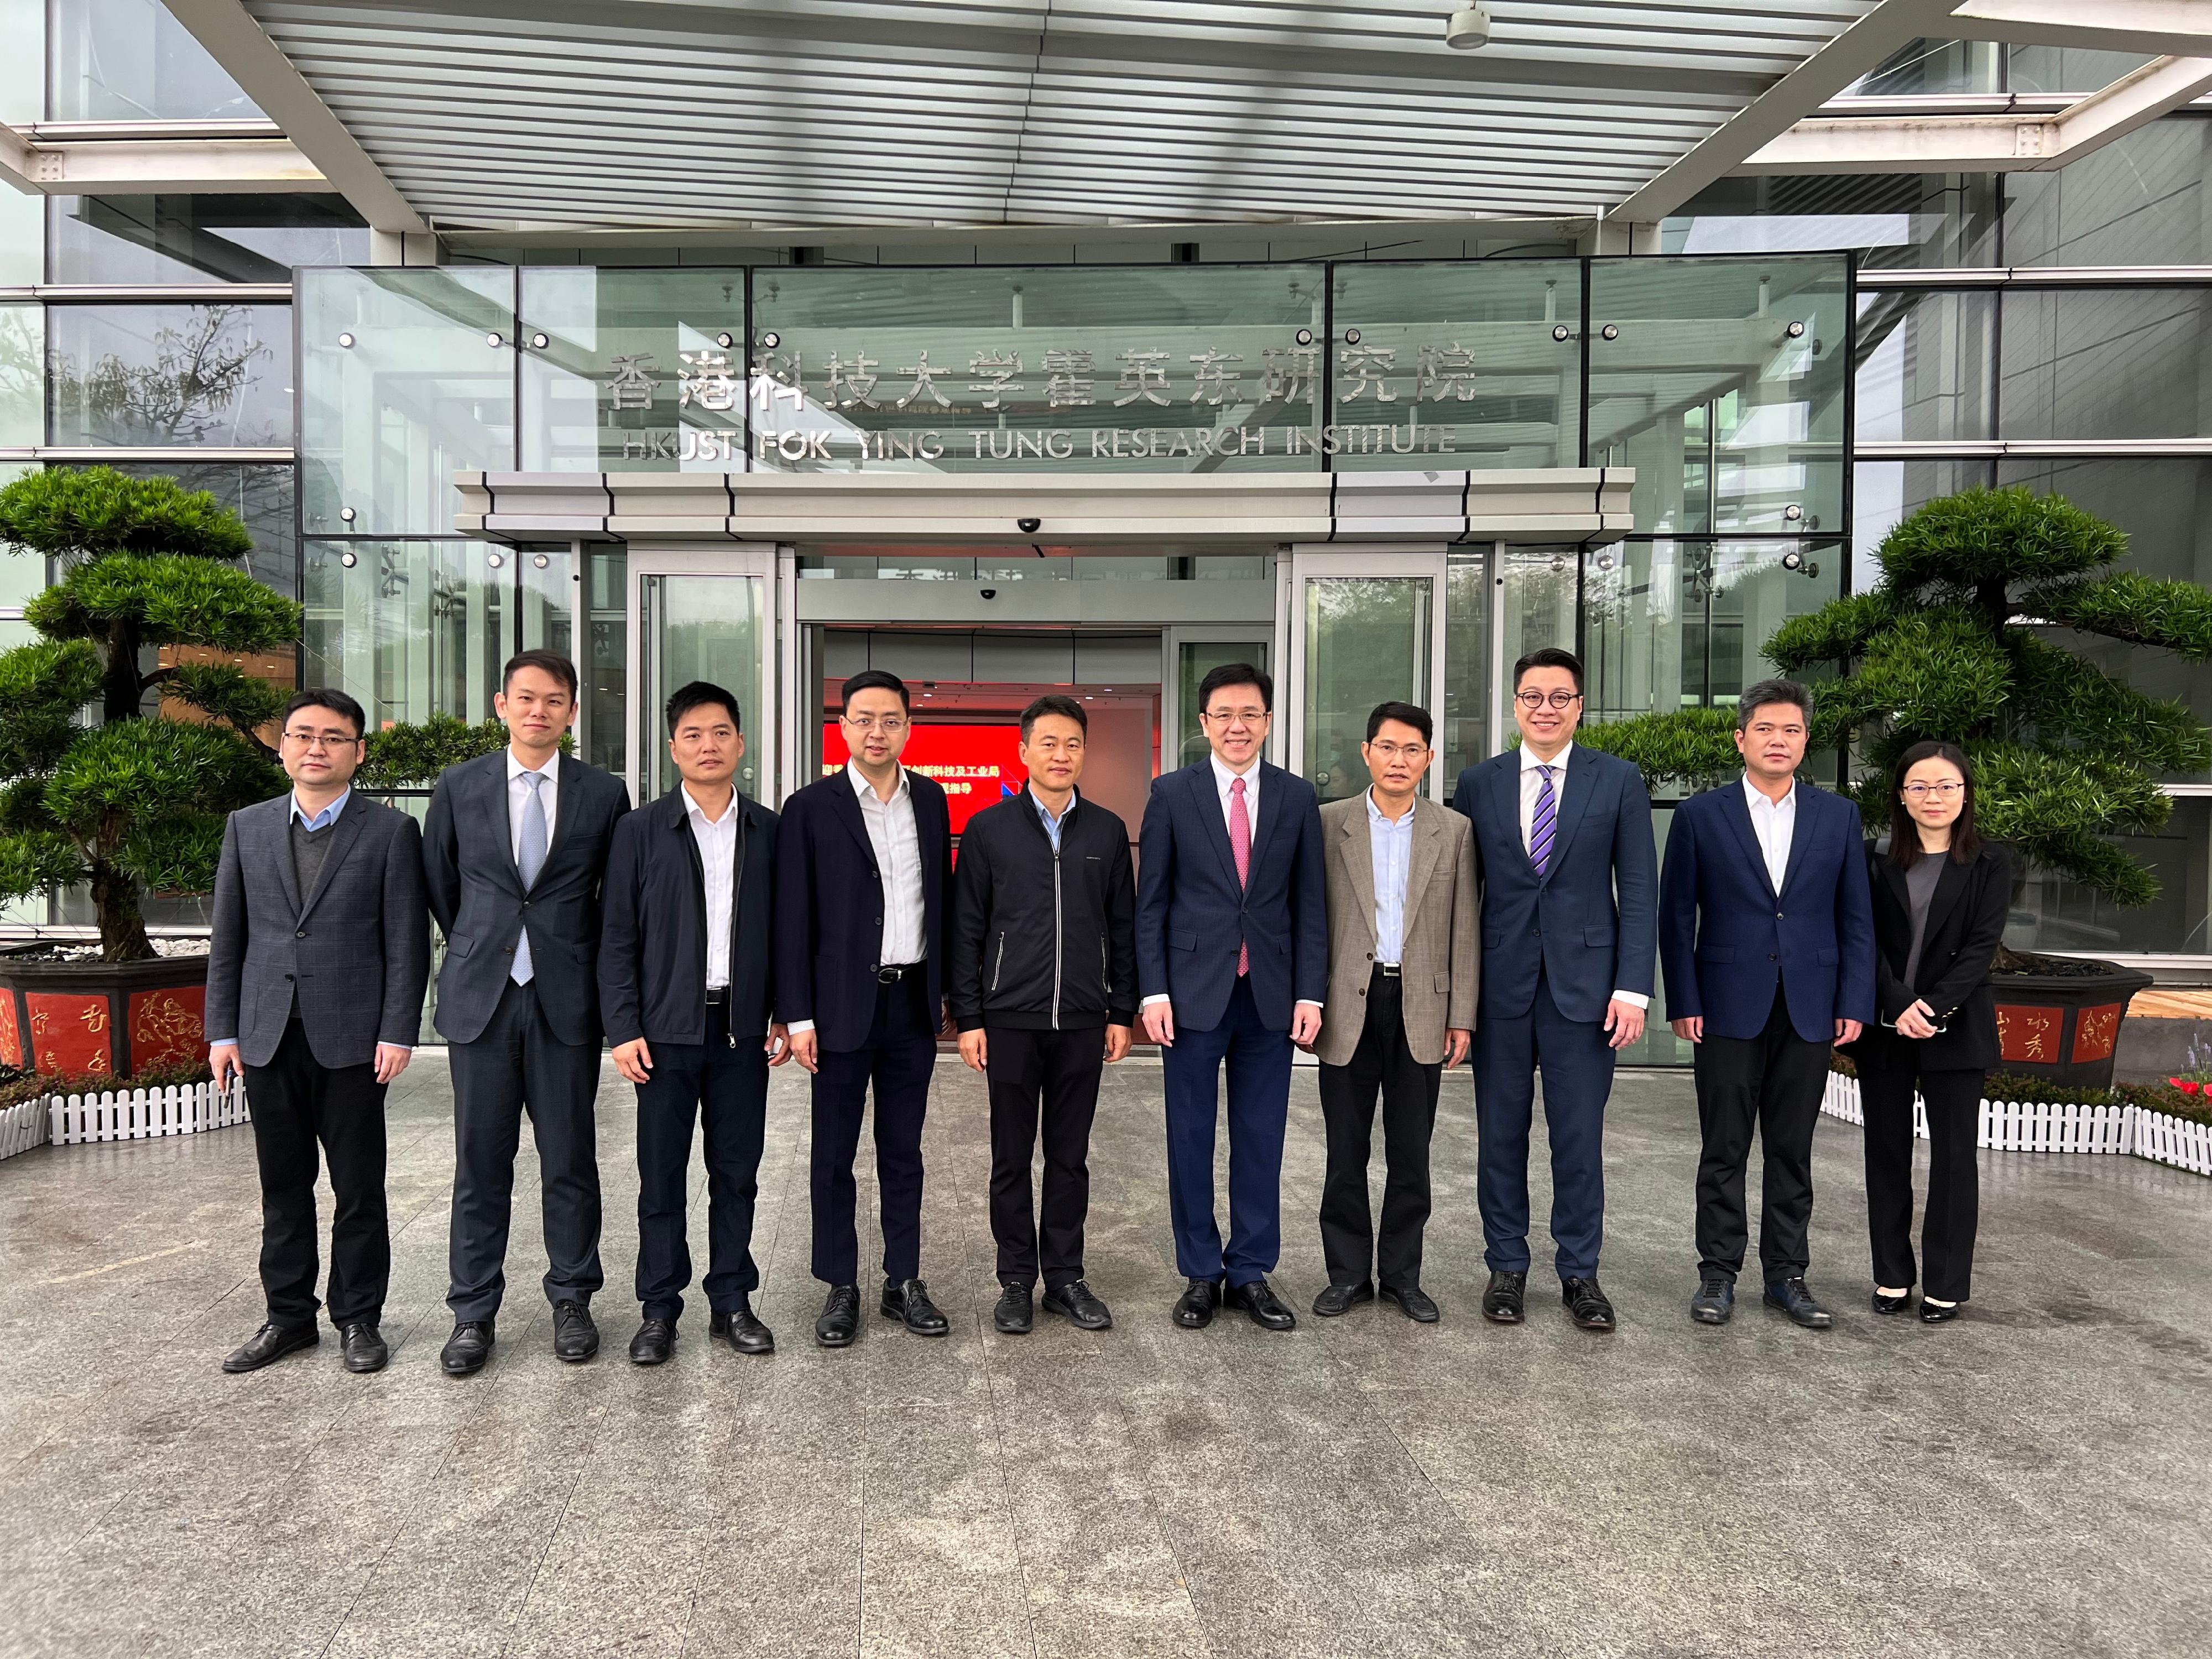 The Secretary for Innovation, Technology and Industry, Professor Sun Dong (fifth right), visits the Hong Kong University of Science and Technology Fok Ying Tung Research Institute located in the Nansha Information Technology Park in Guangzhou today (March 31), to understand the Institute's work in applied research and development (R&D) and transformation of R&D outcomes under the Guangdong-Hong Kong collaboration. Looking on is Deputy Secretary of the CPC Working Committee of Nansha Development Zone, Guangzhou Mr Xie Wei (fifth left).